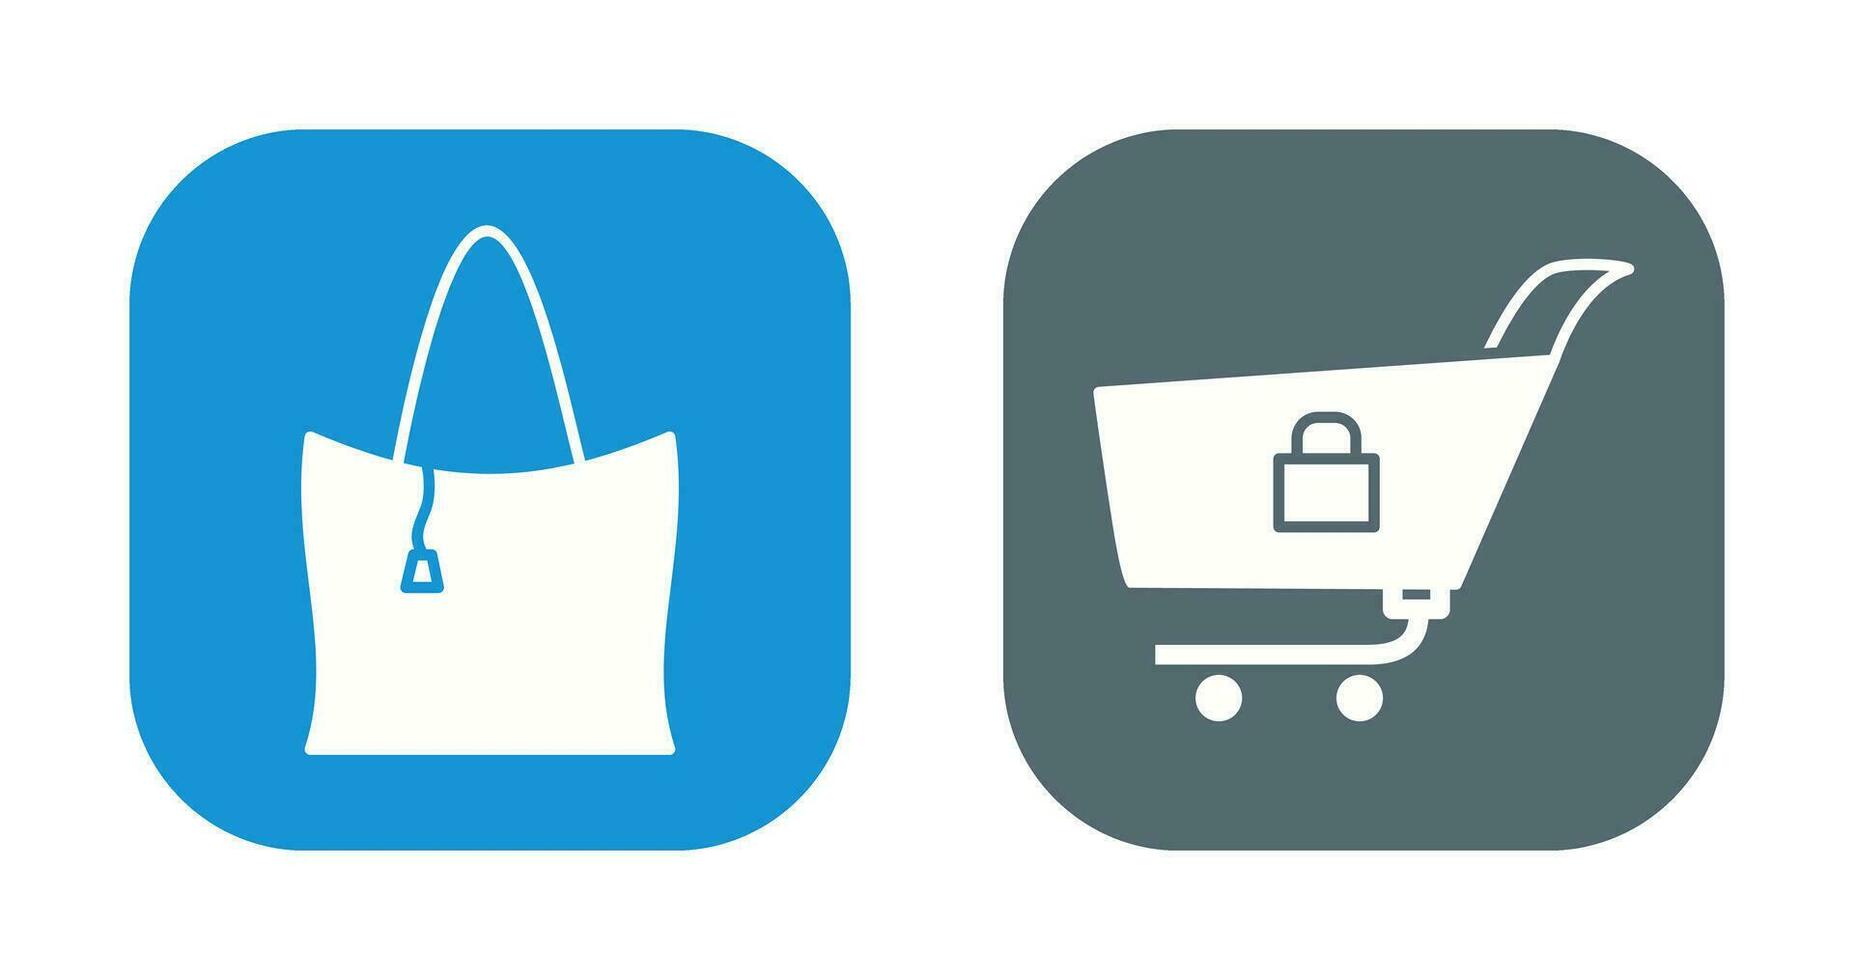 checkout and lcoked cart Icon vector